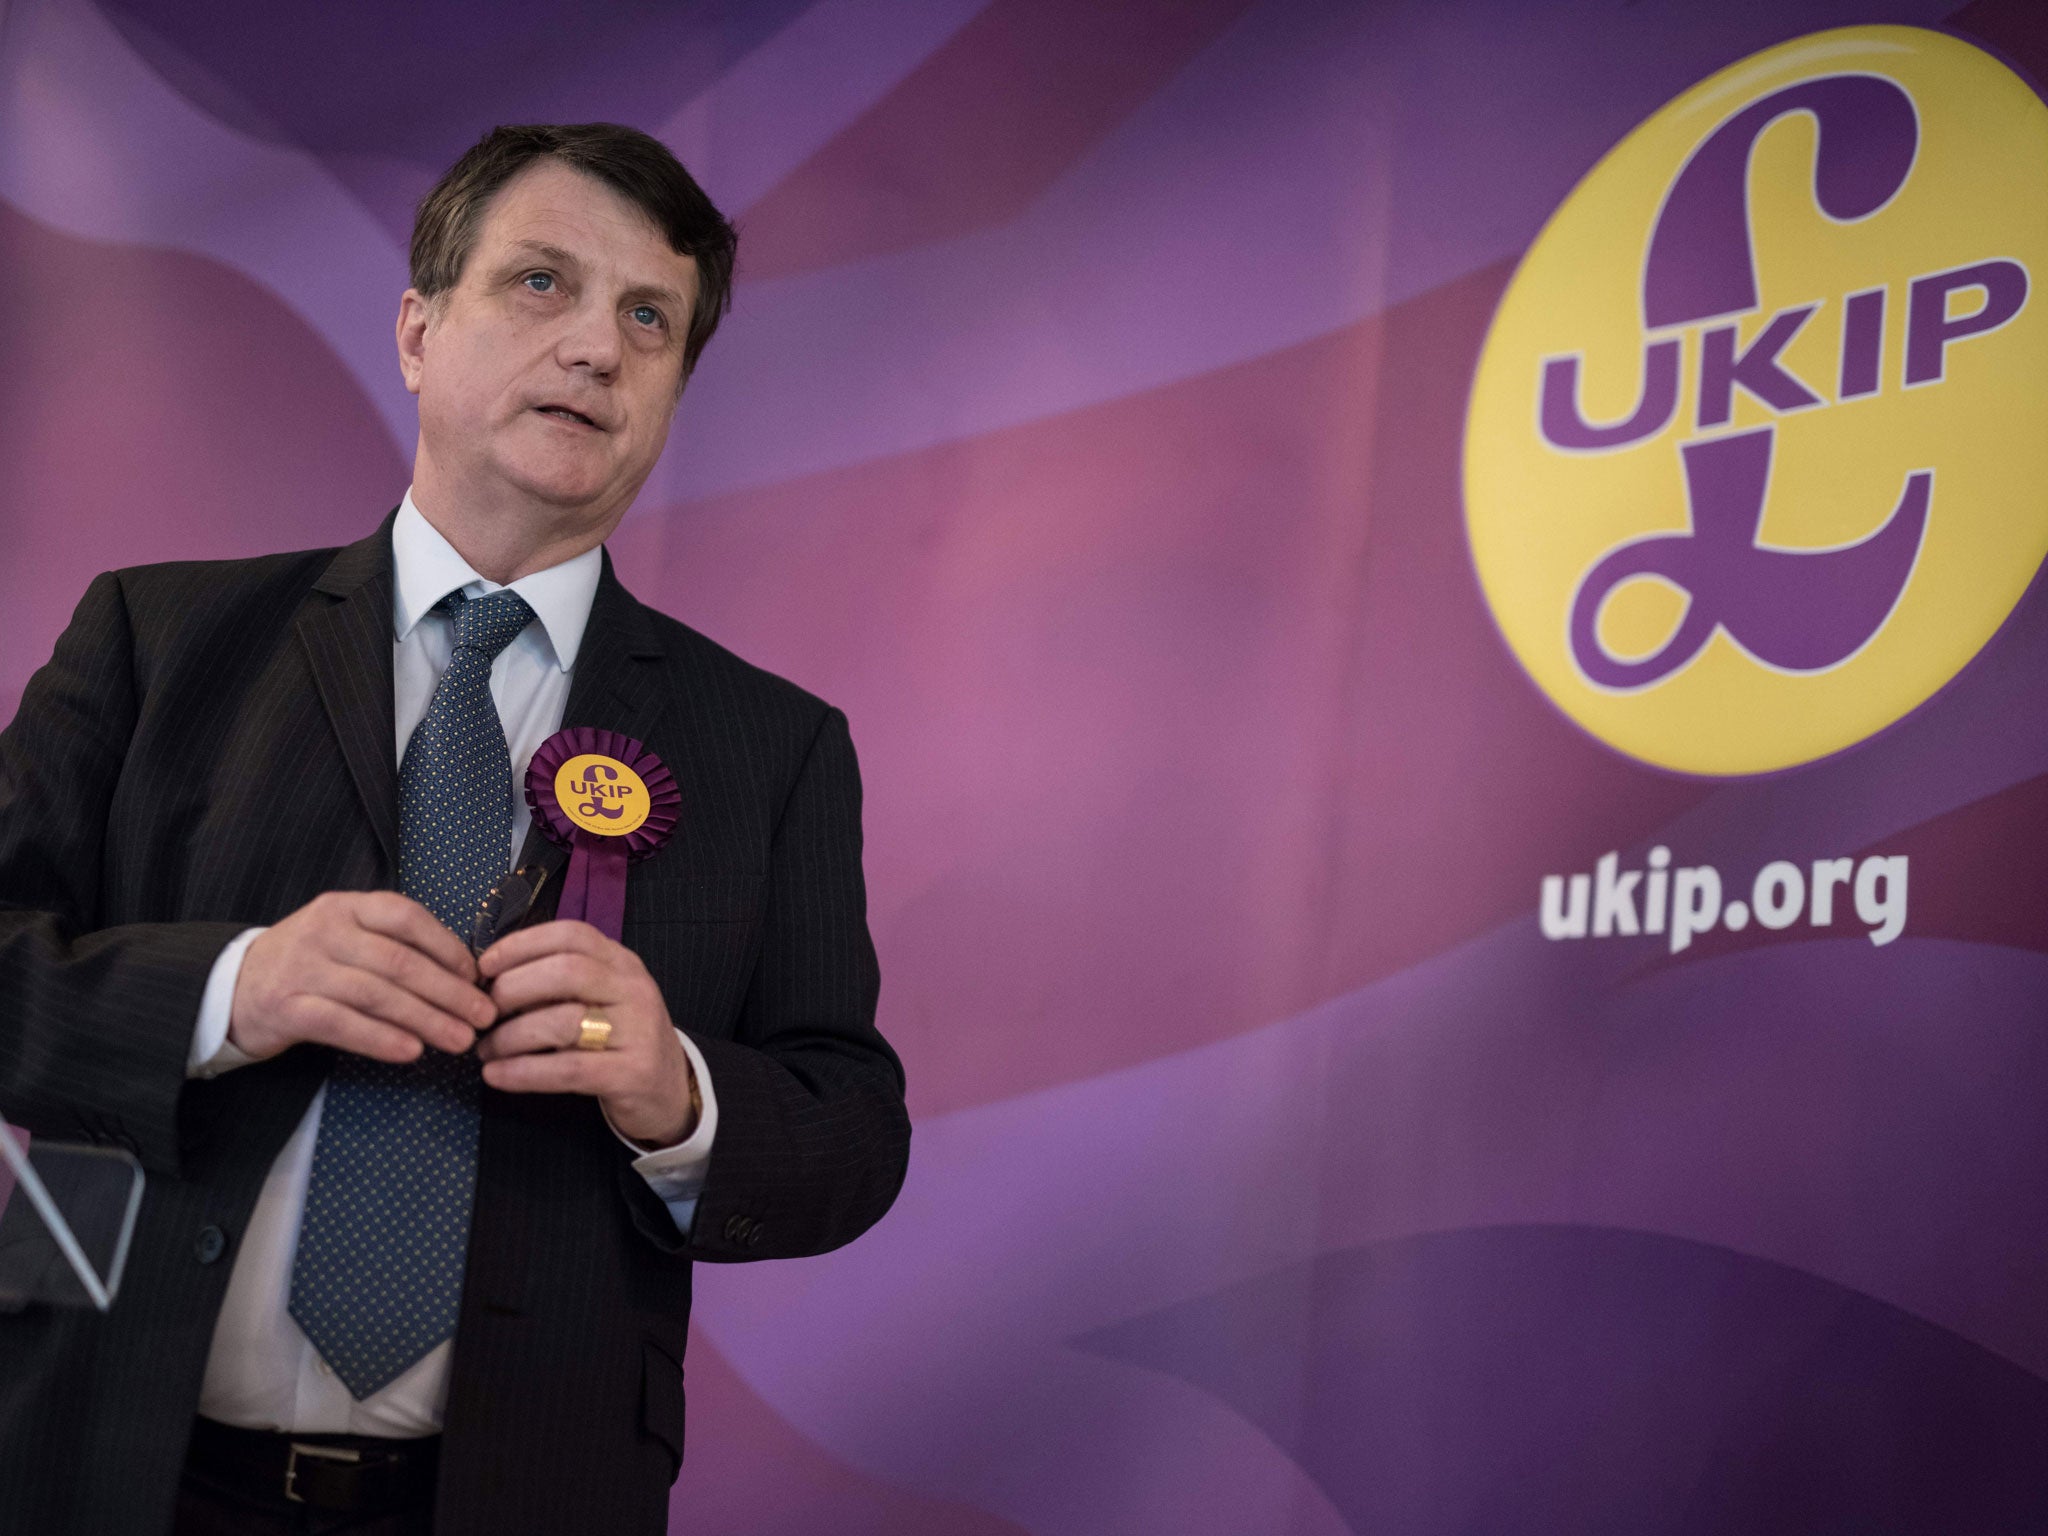 MEP Gerard Batten, who made the comments during the party's Brexit relaunch